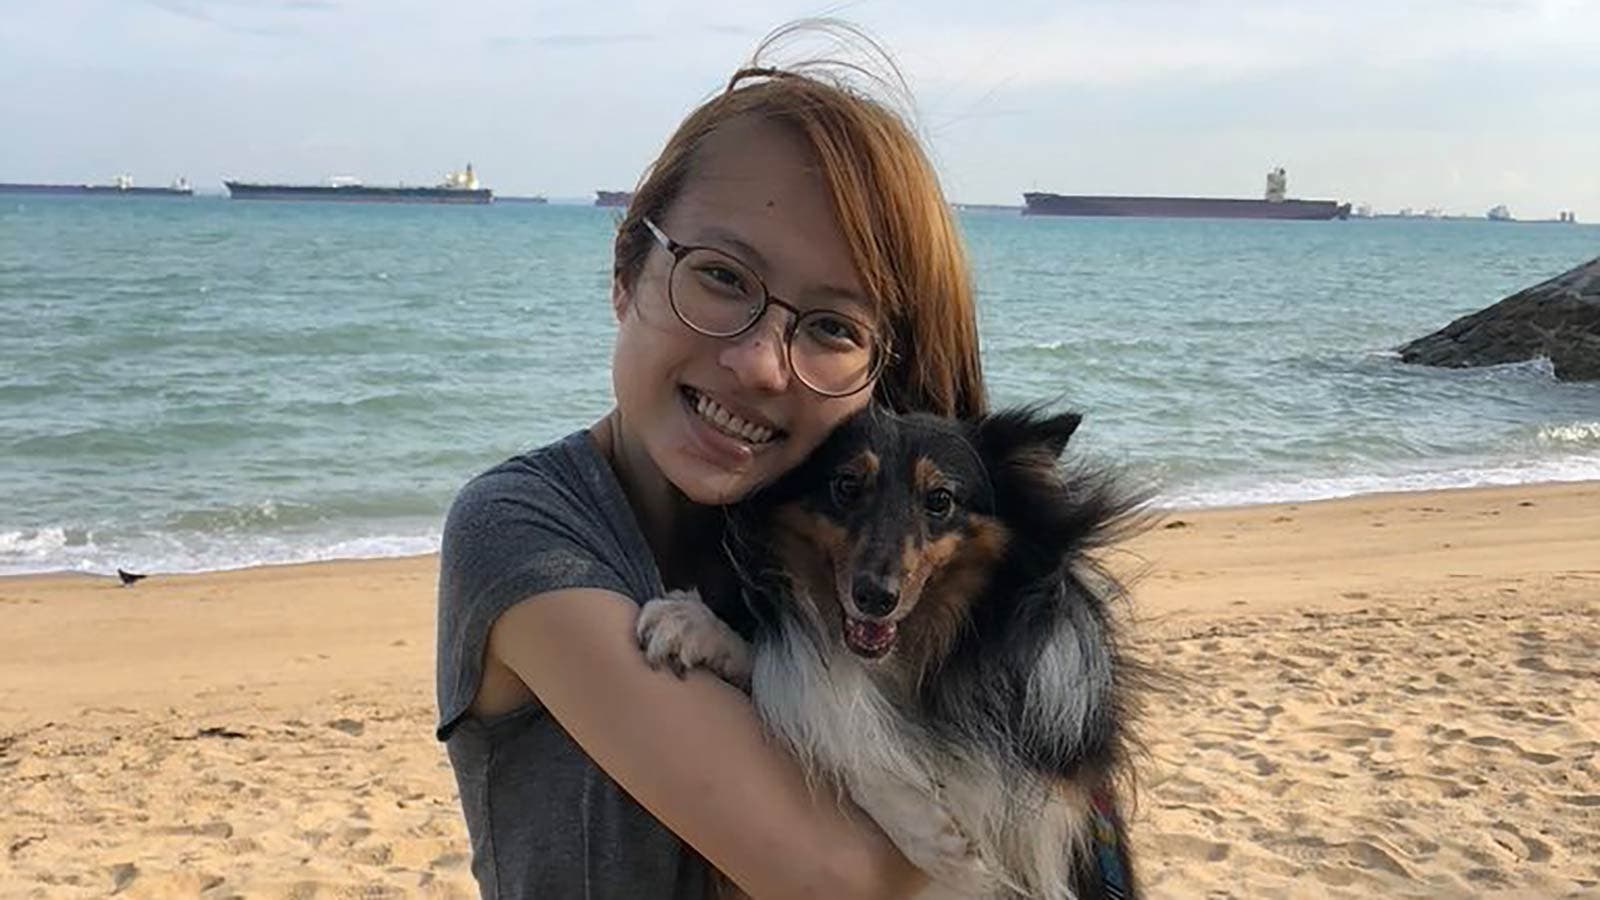 Tricia from Singapore holding dog on beach